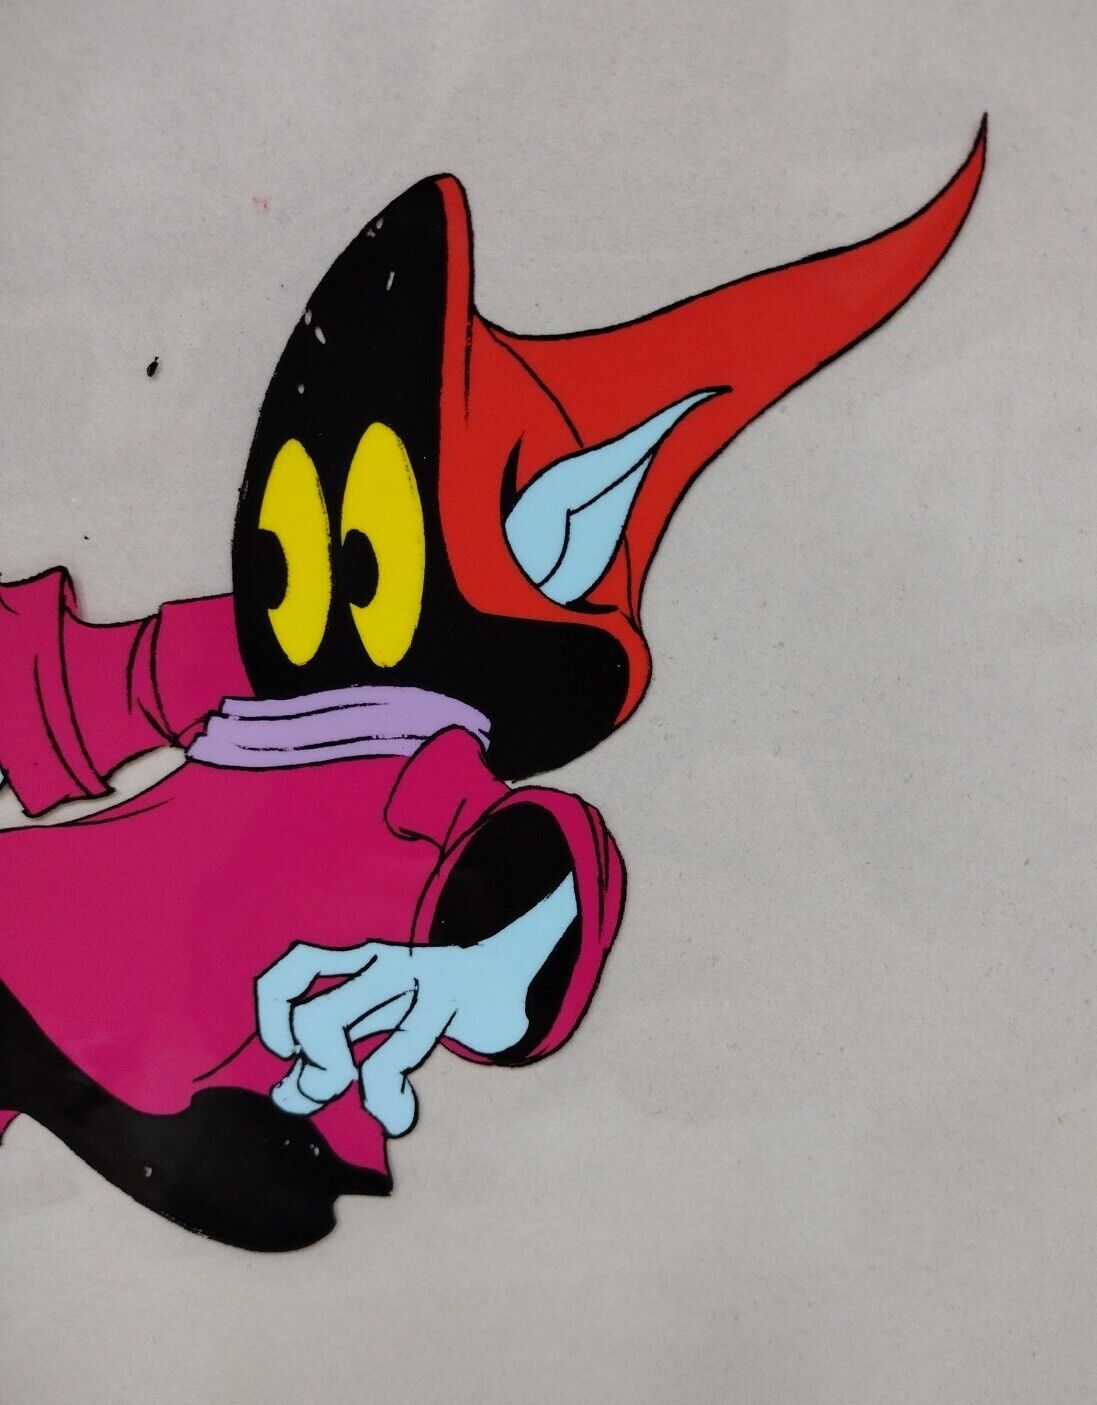 He-Man Masters of the Universe Animation Orko Production Cel W Under Drawing